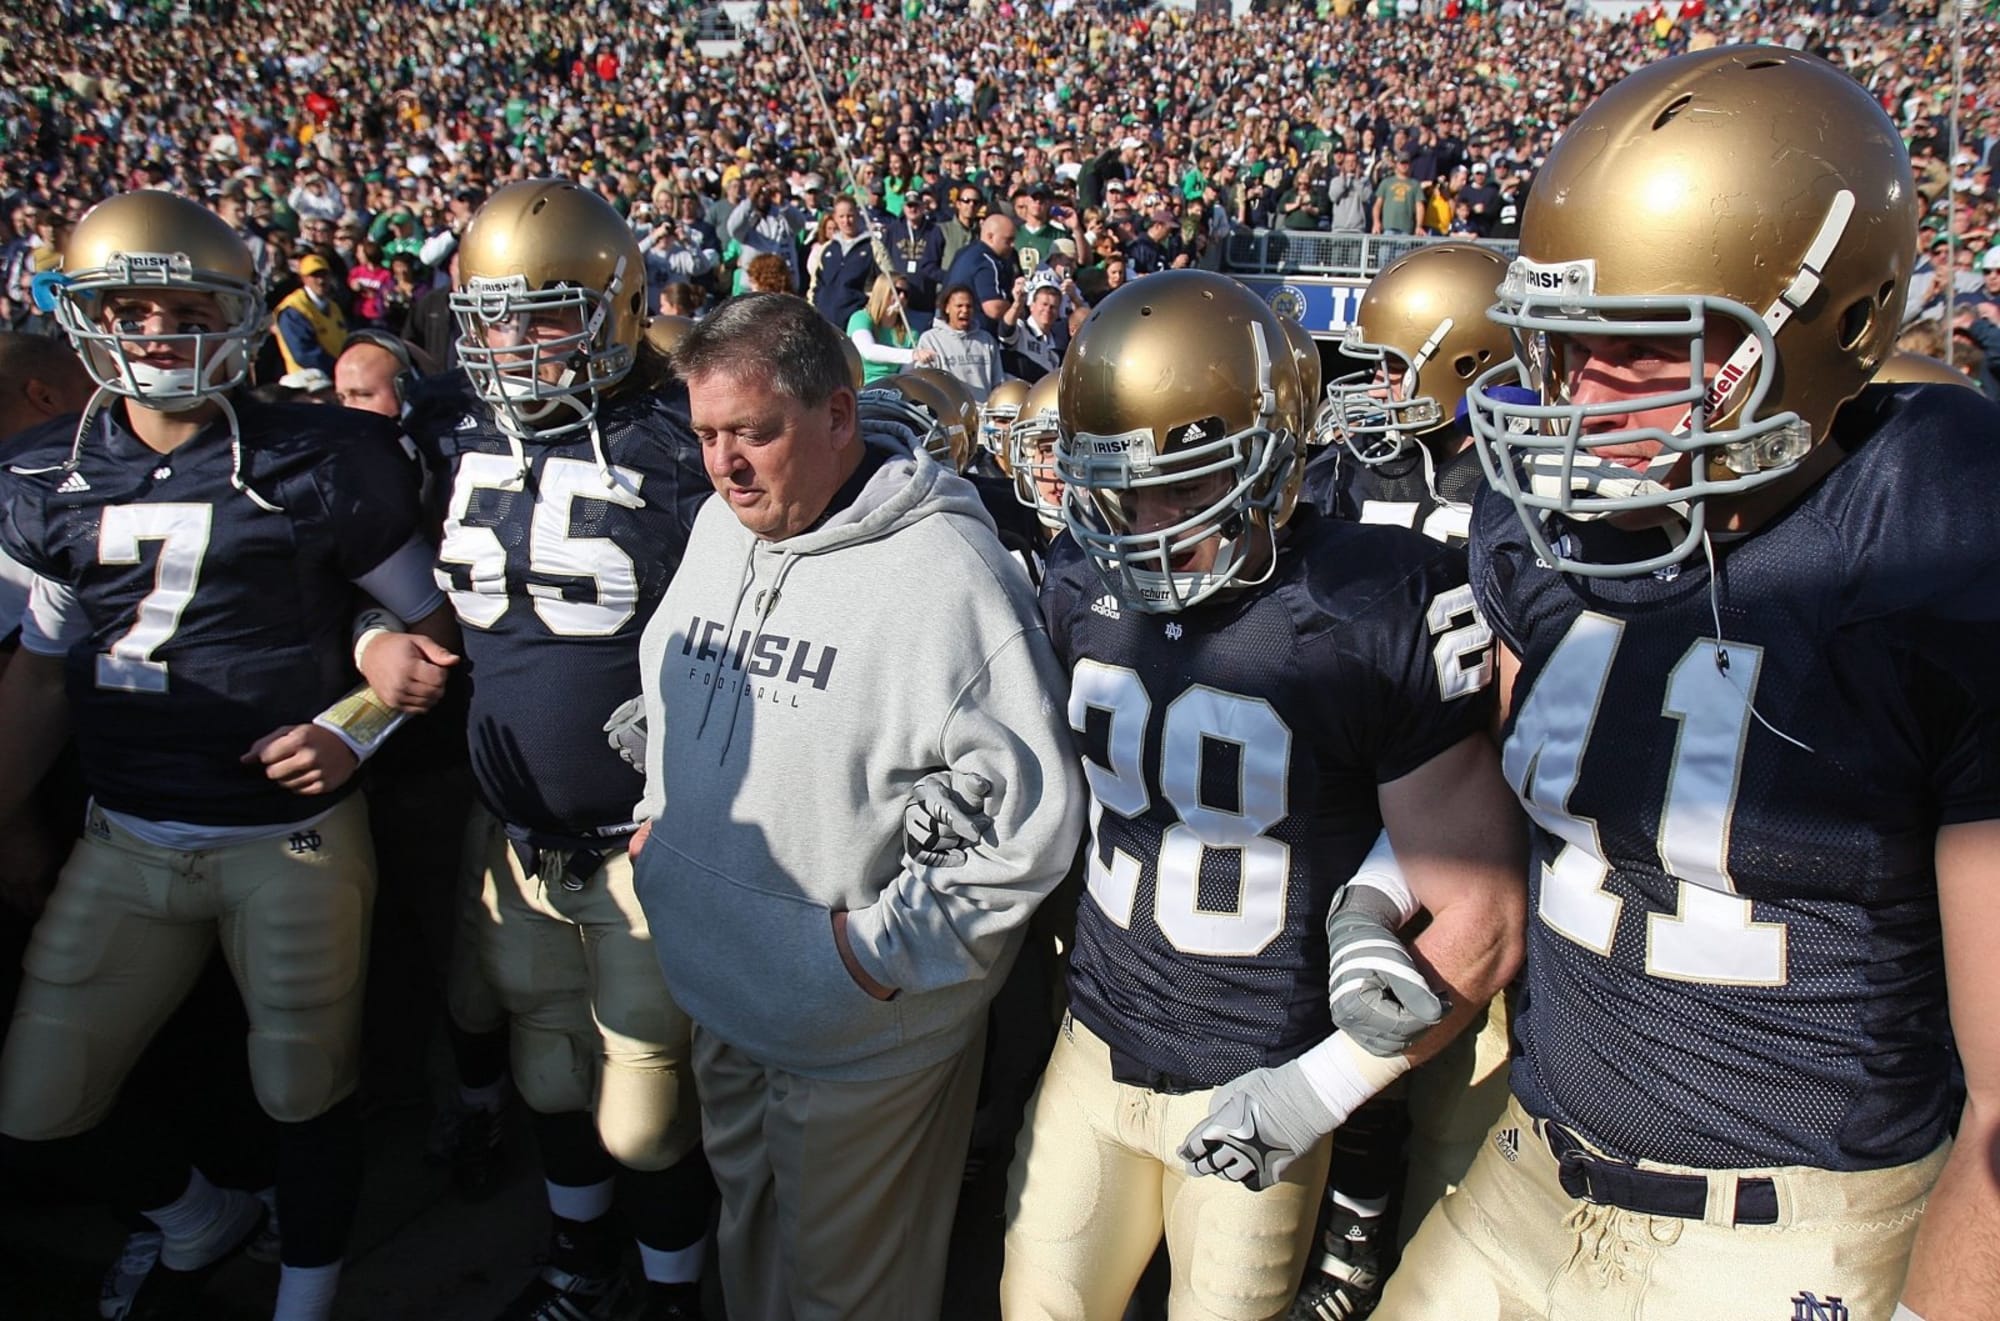 Notre Dame Football: The disaster that was the 2009 season